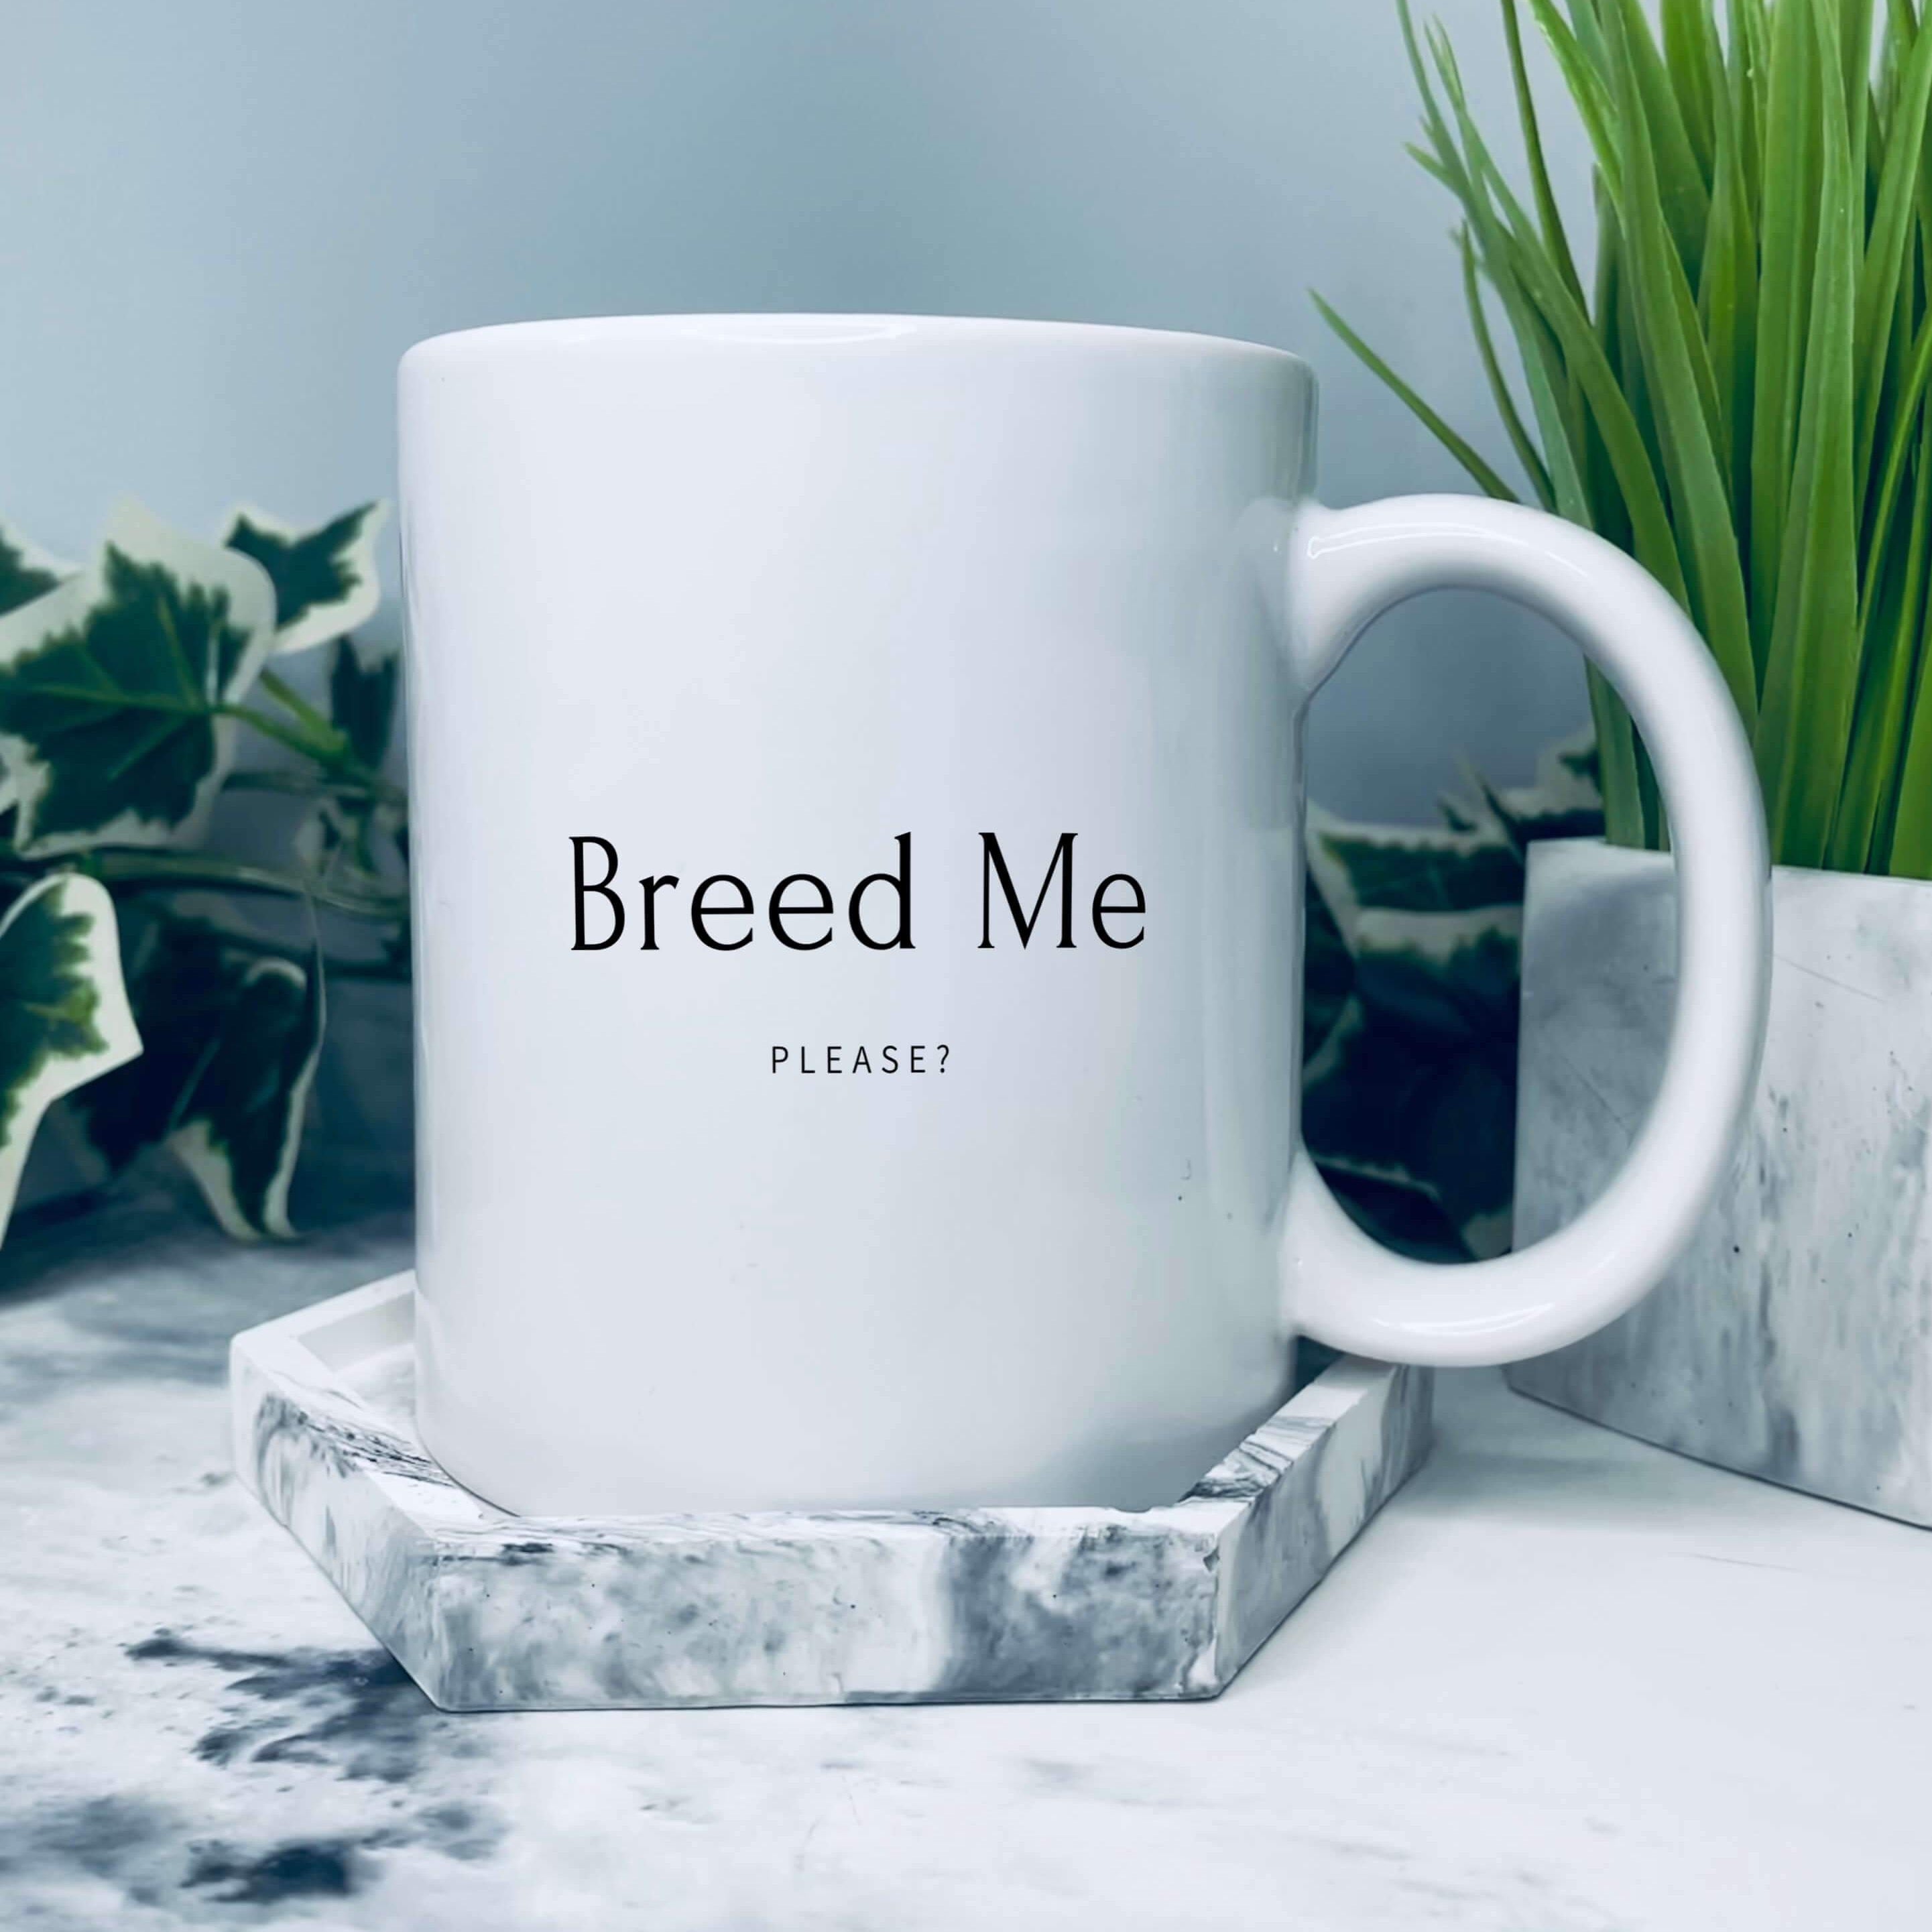 Mug that reads: "Breed me" with smaller text underneath saying "please?"